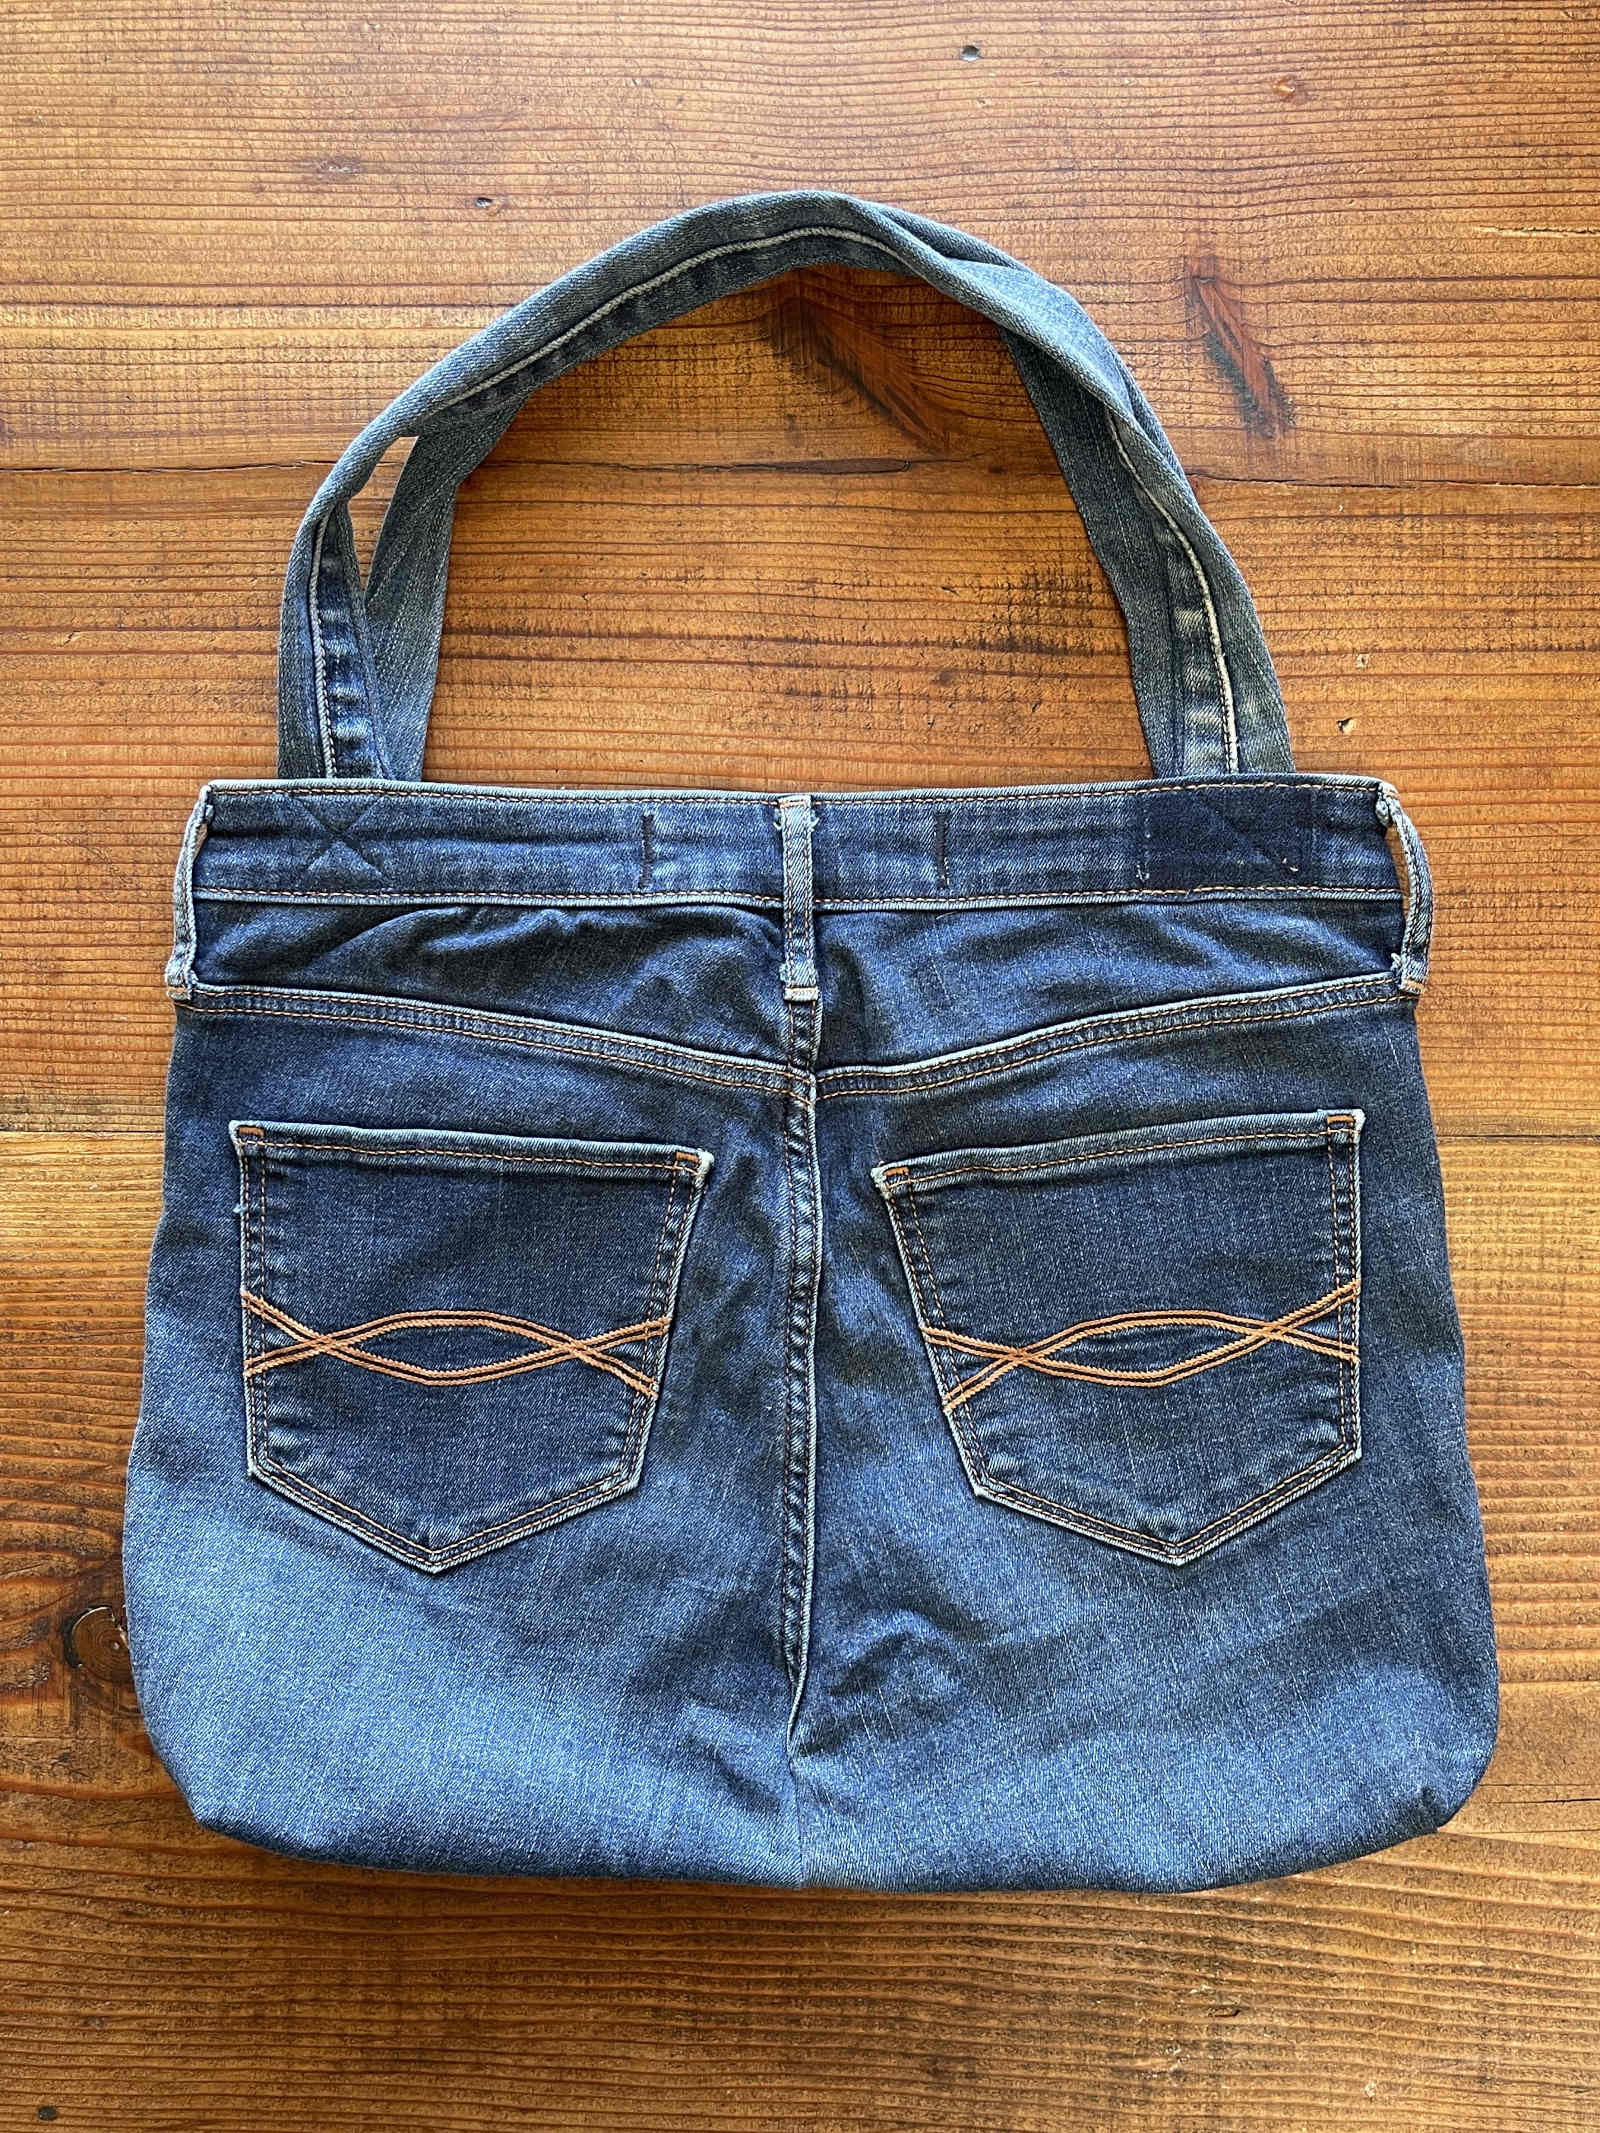 How to Make Bag From Old Jeans Pant : 4 Steps - Instructables